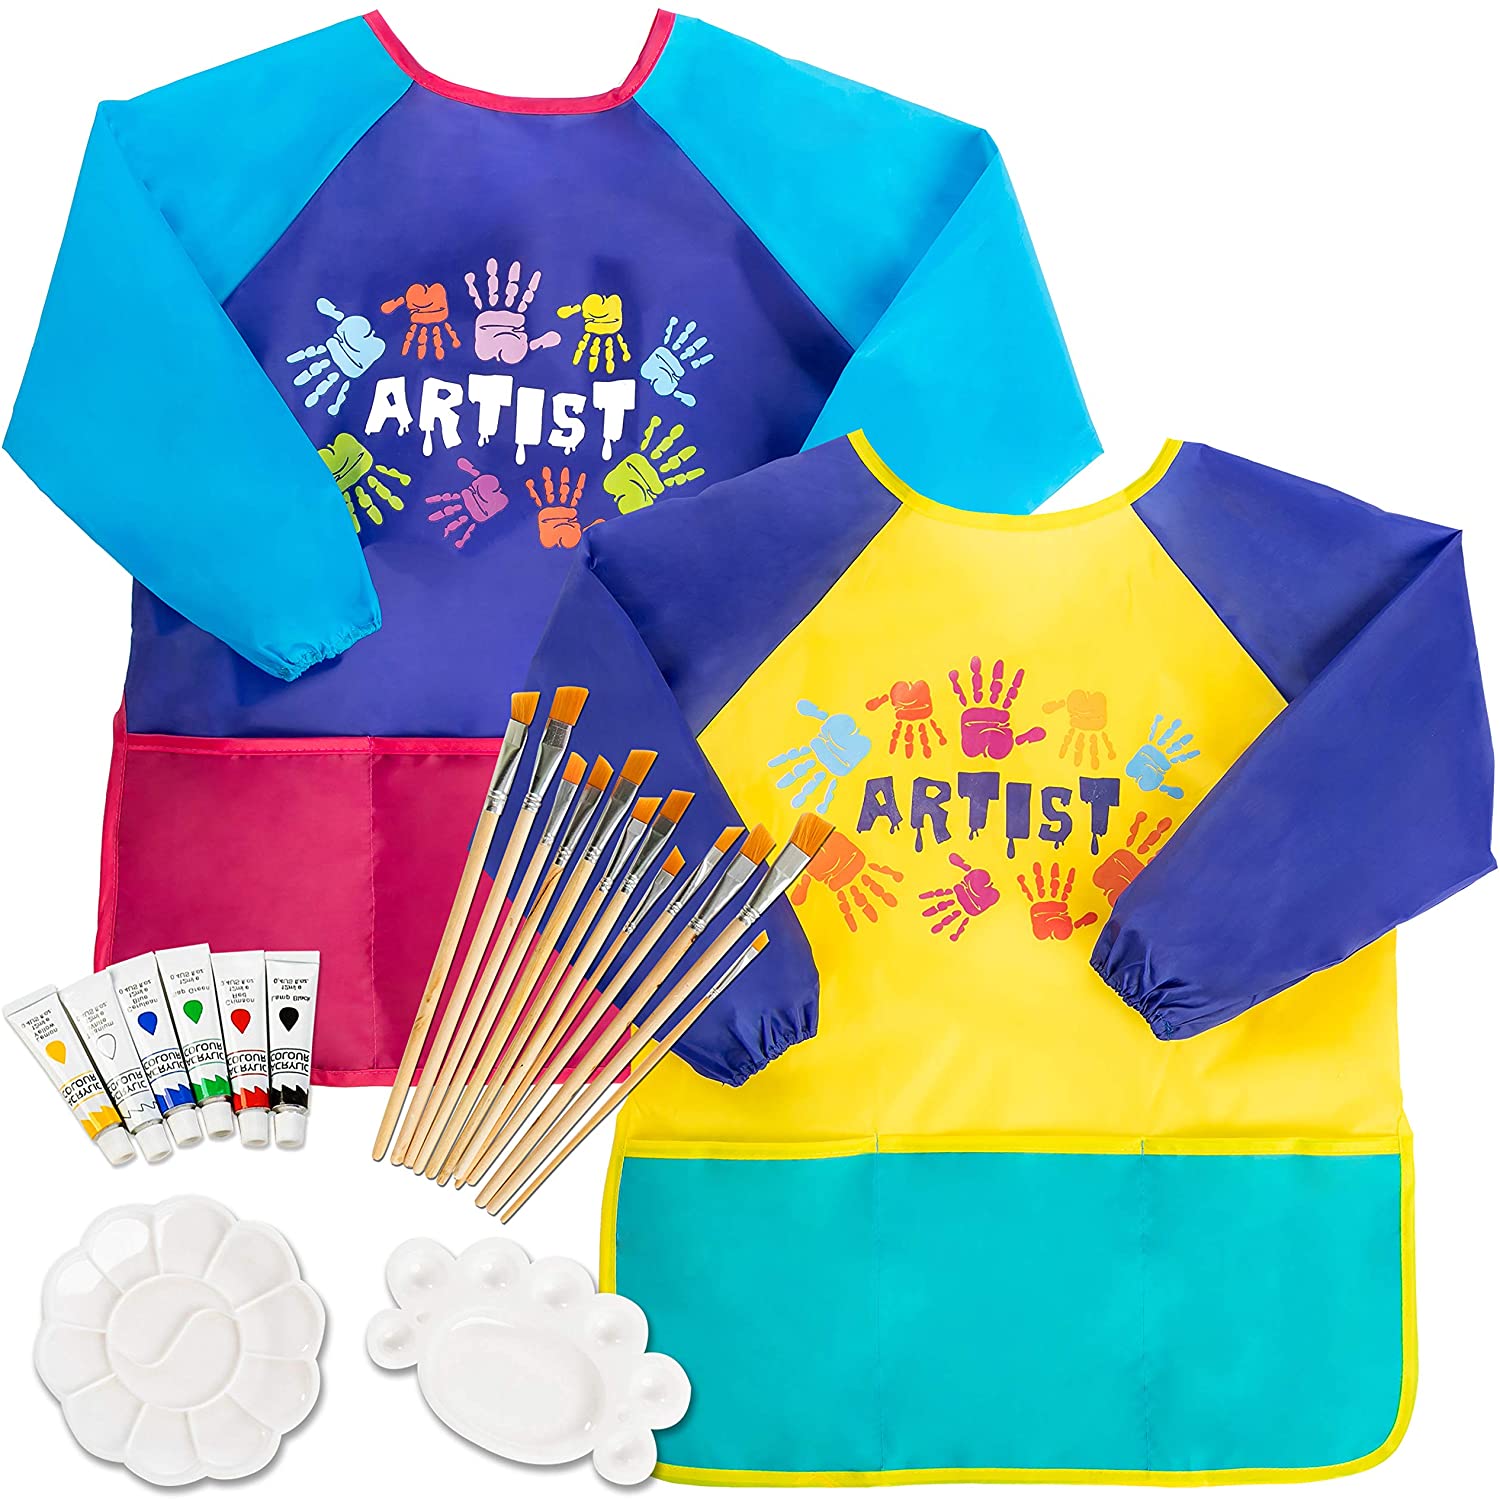 22-pcs Painting Supplies for Kids